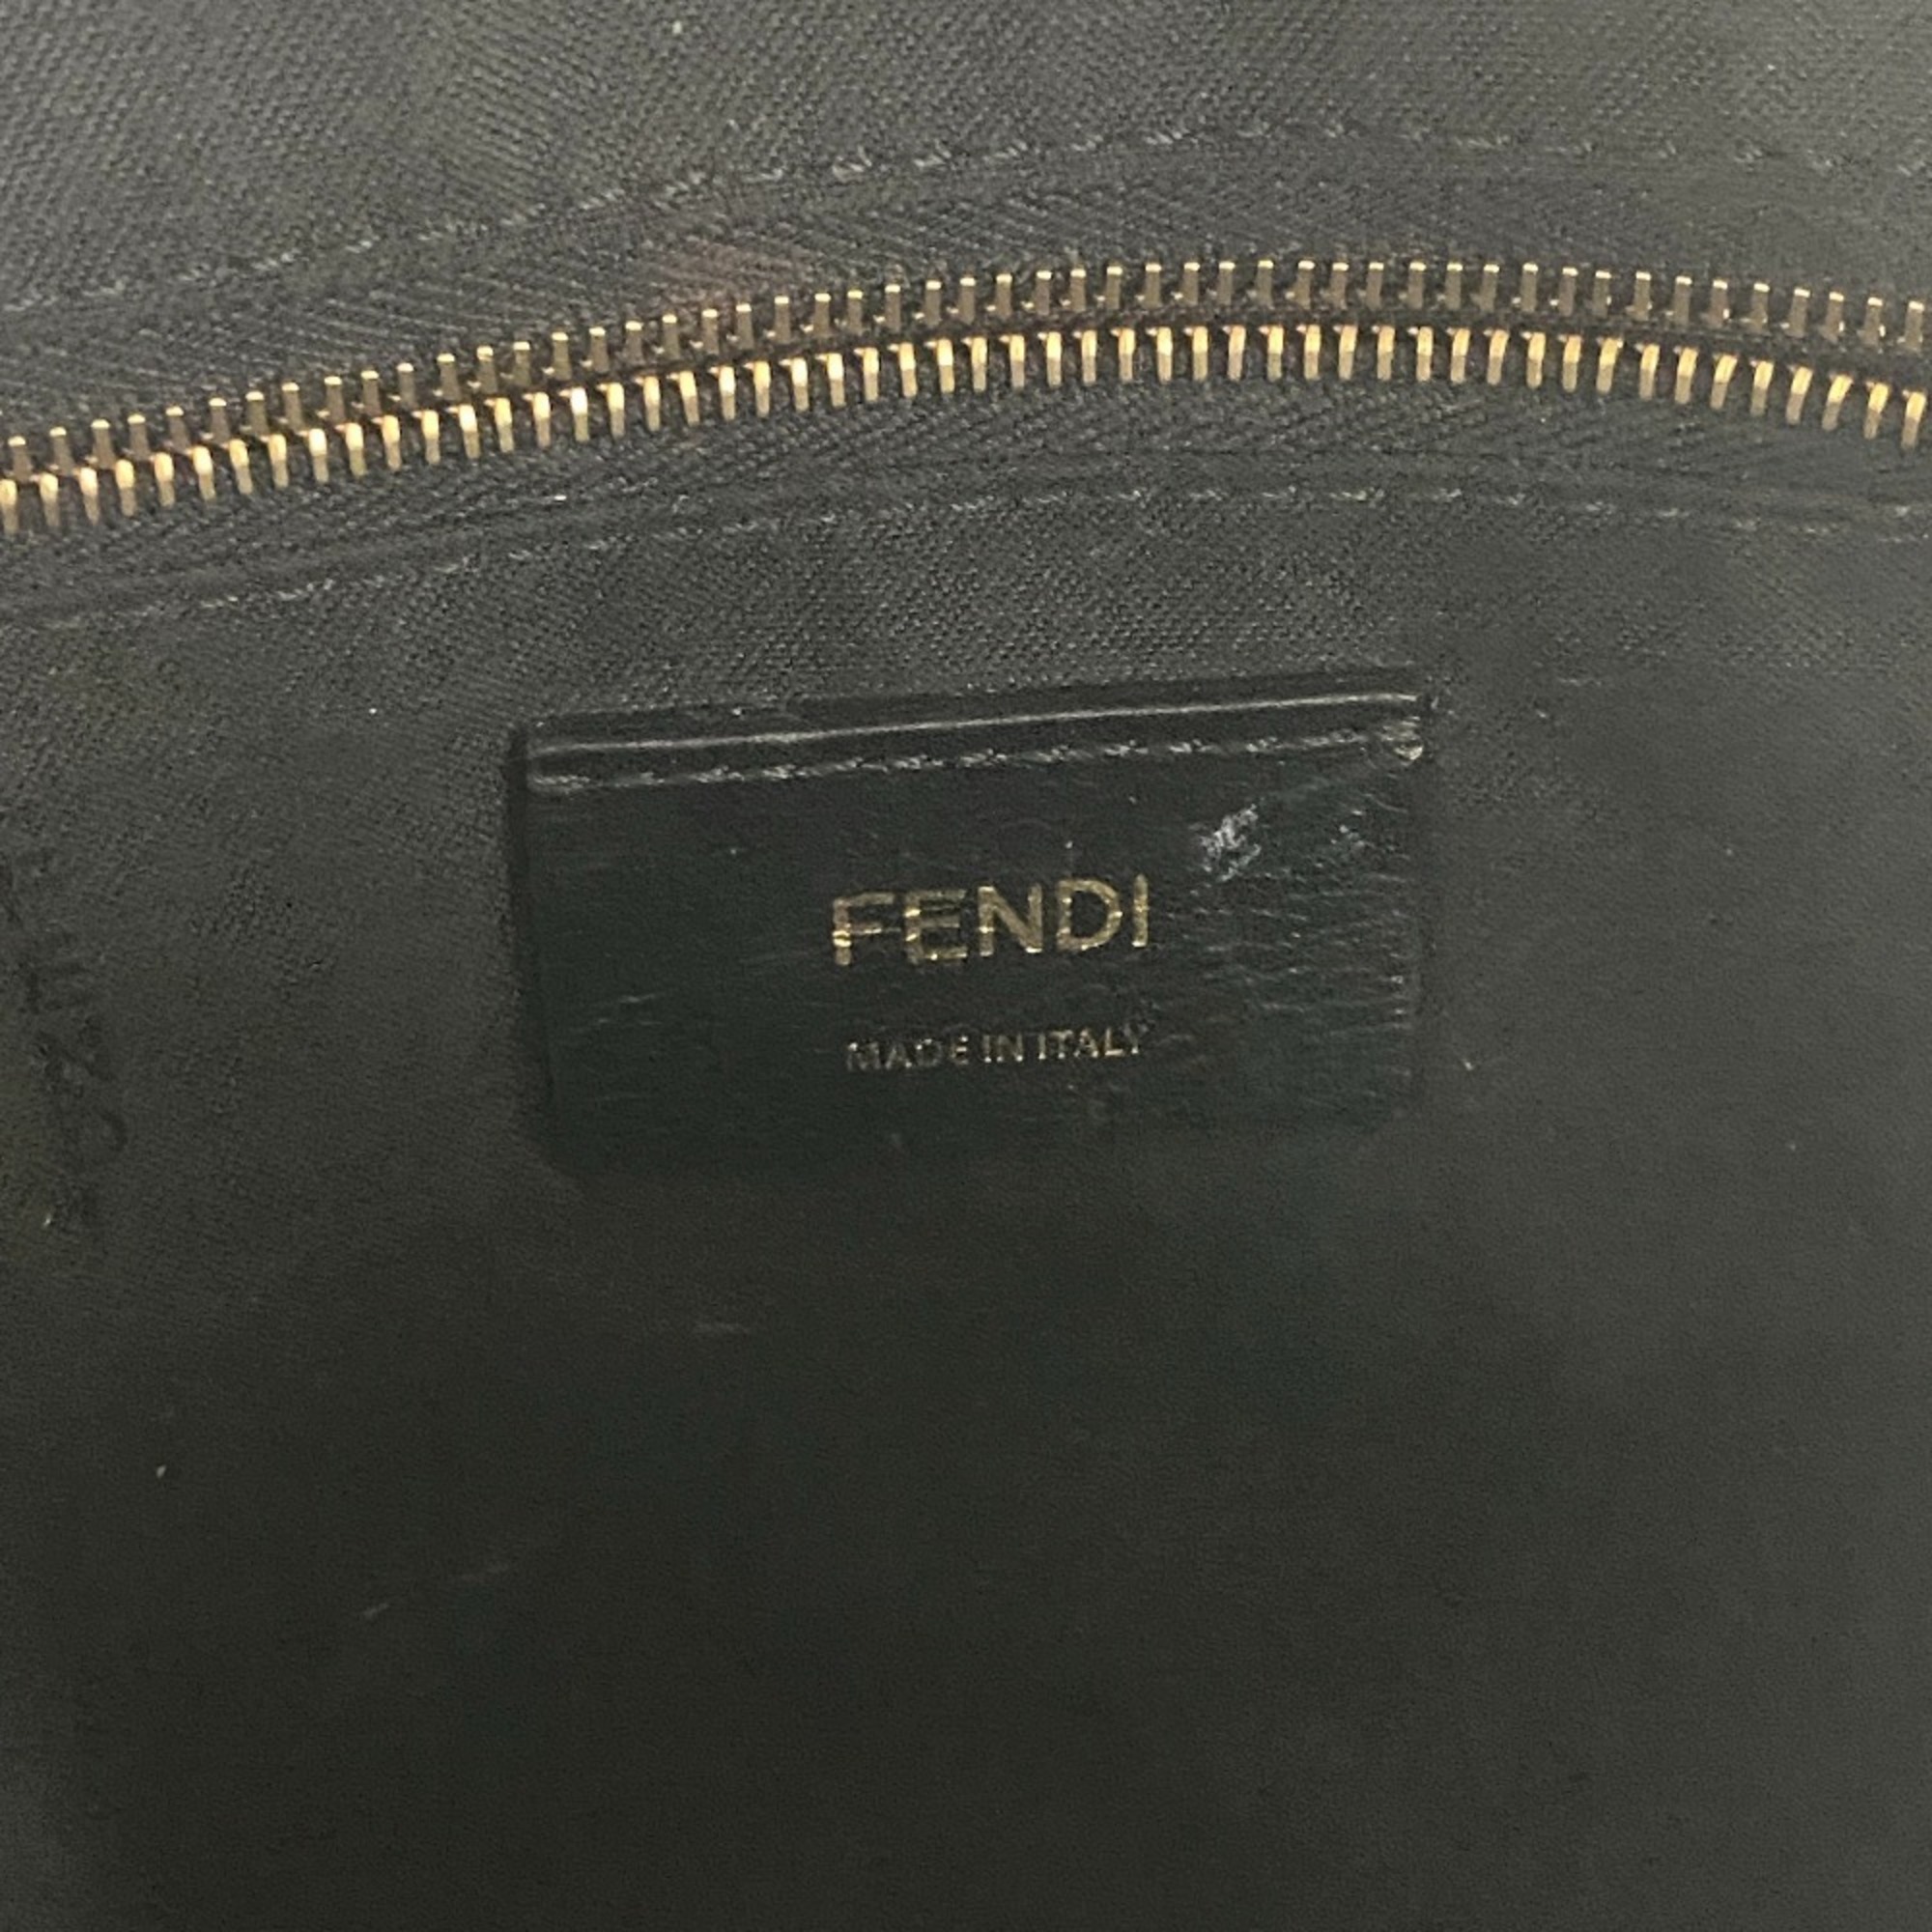 FENDI 8BZ038 By the Way Zucca Backpack/Daypack Brown Women's